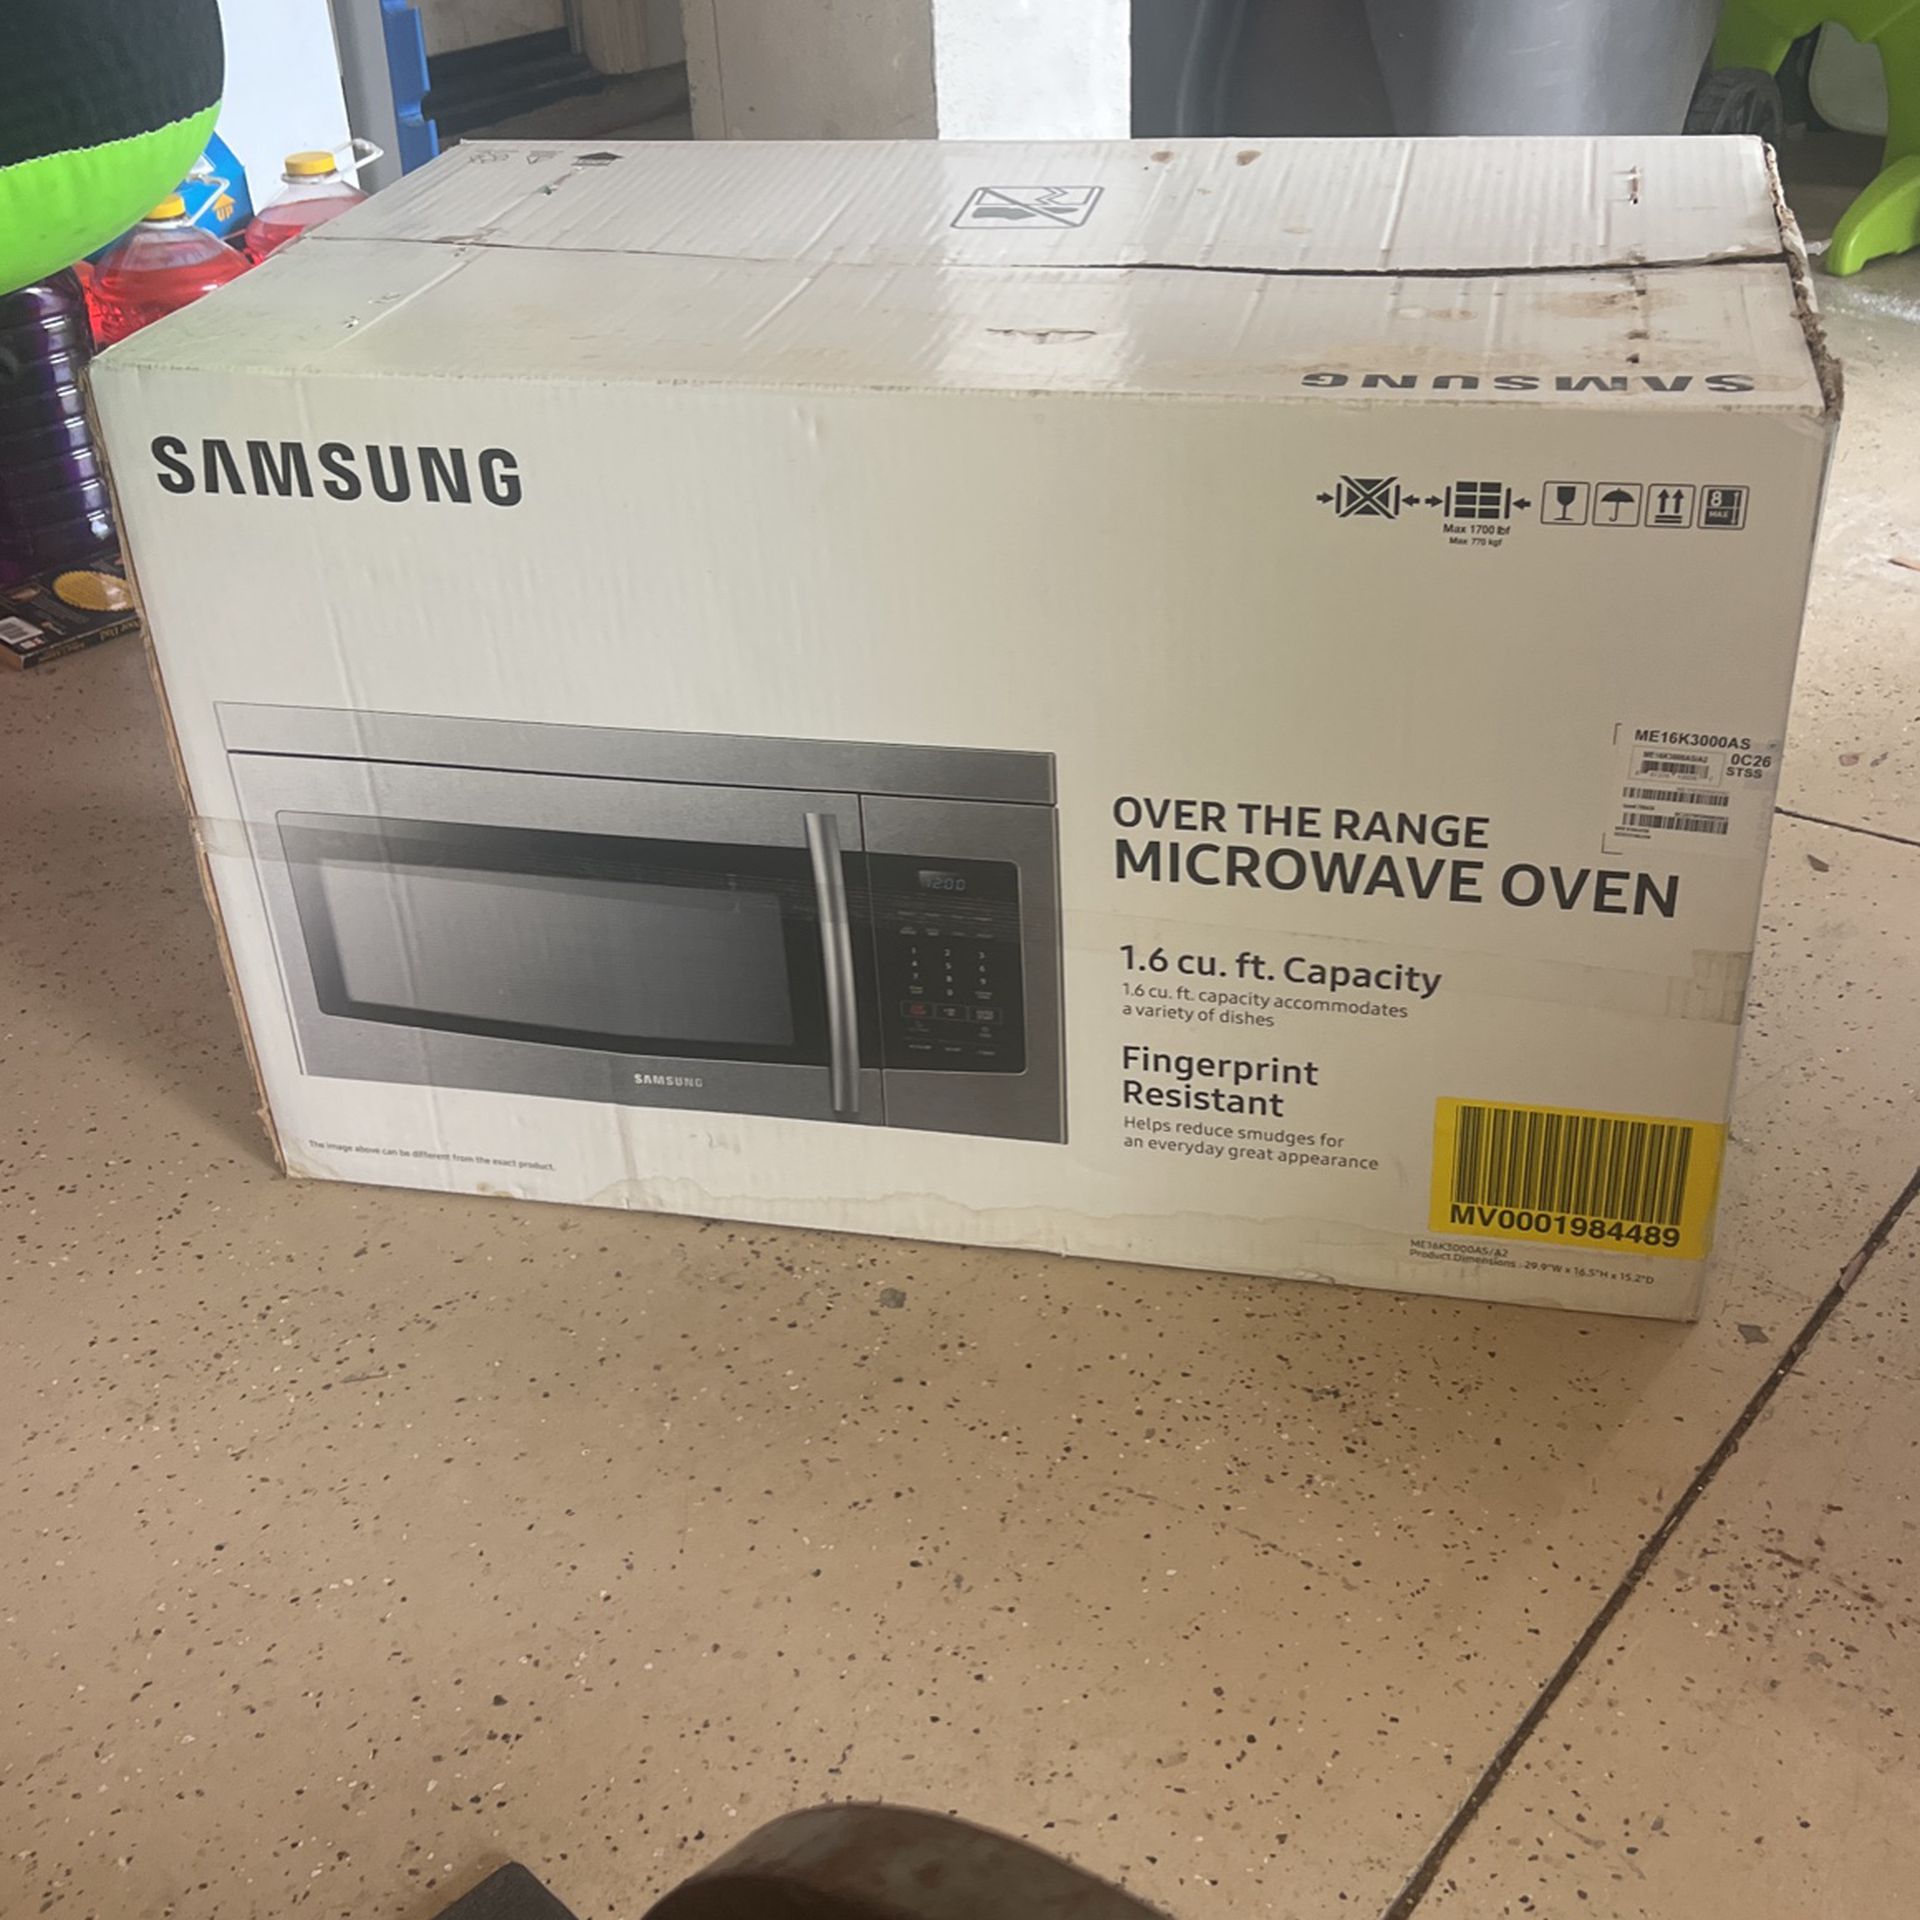 Samsung Over The Range Microwave Oven